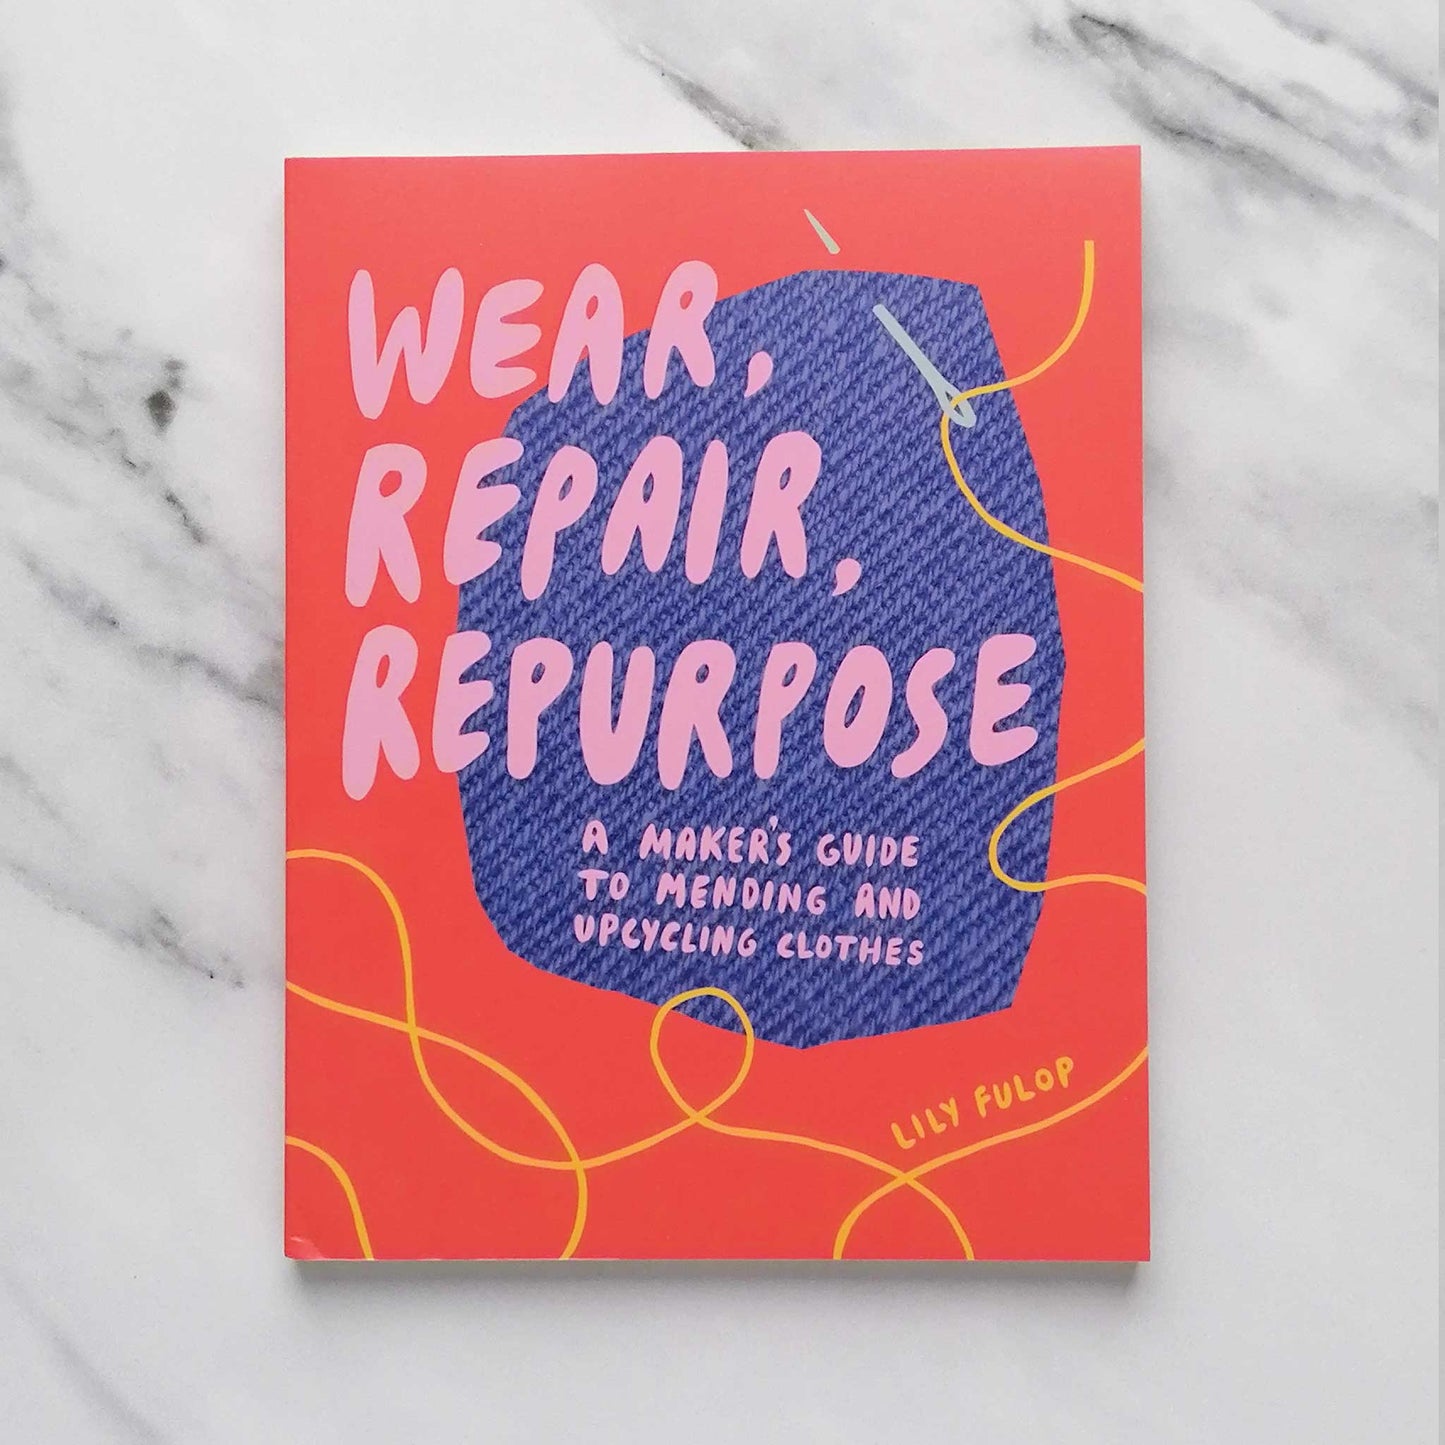 Our Bookshelf Print Books Wear, Repair, Repurpose : A Maker's Guide to Mending and Upcycling Clothes